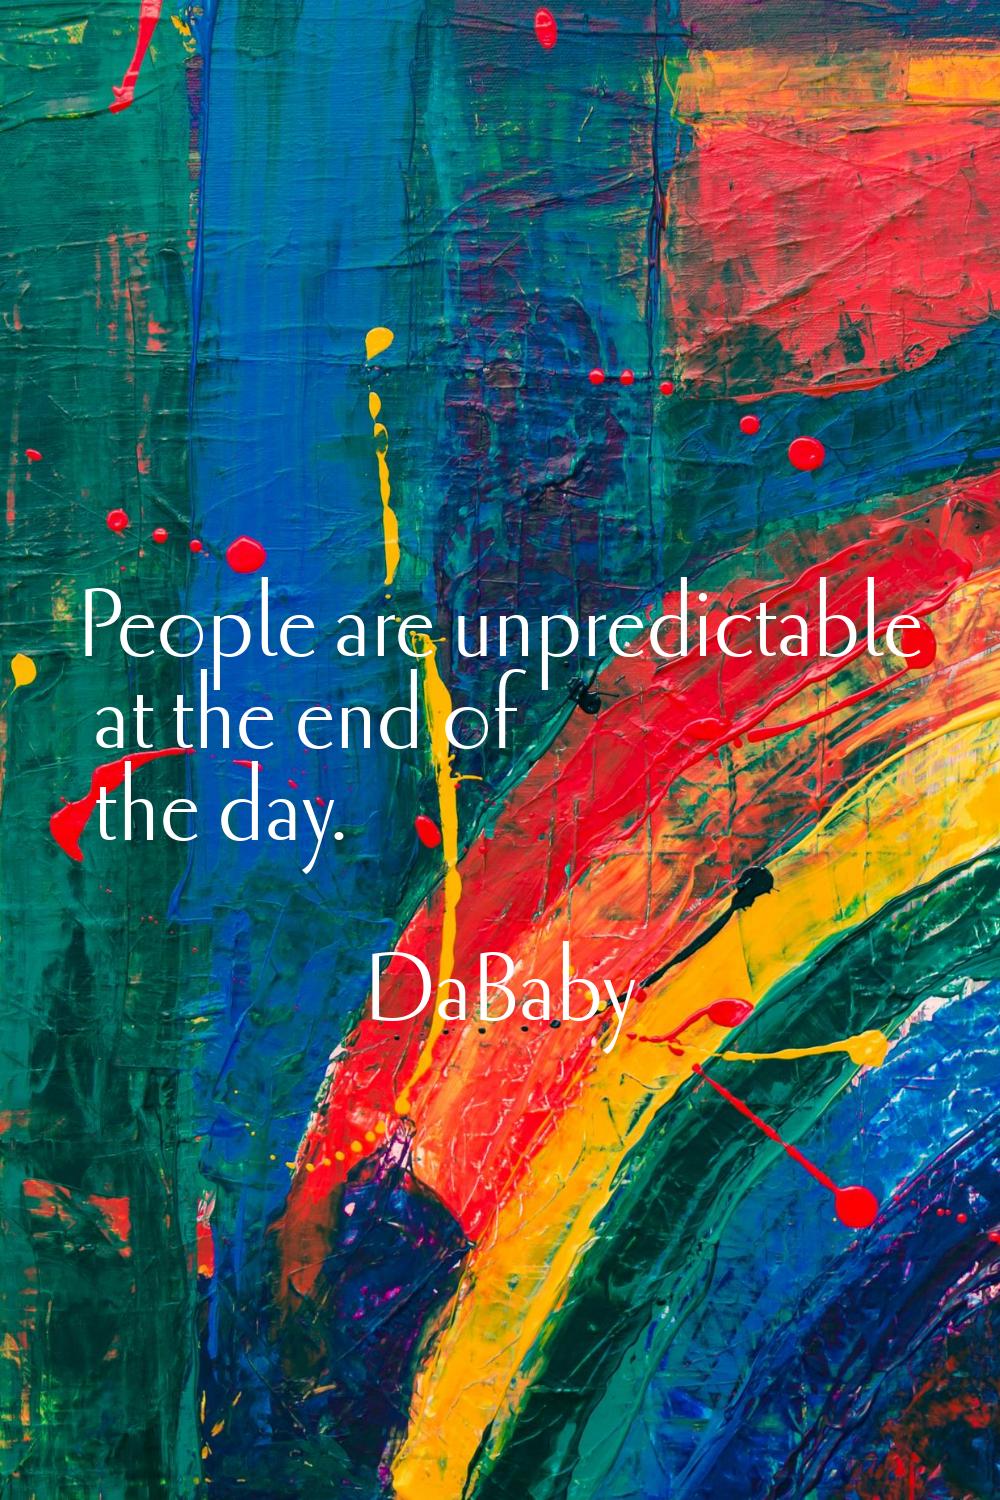 People are unpredictable at the end of the day.